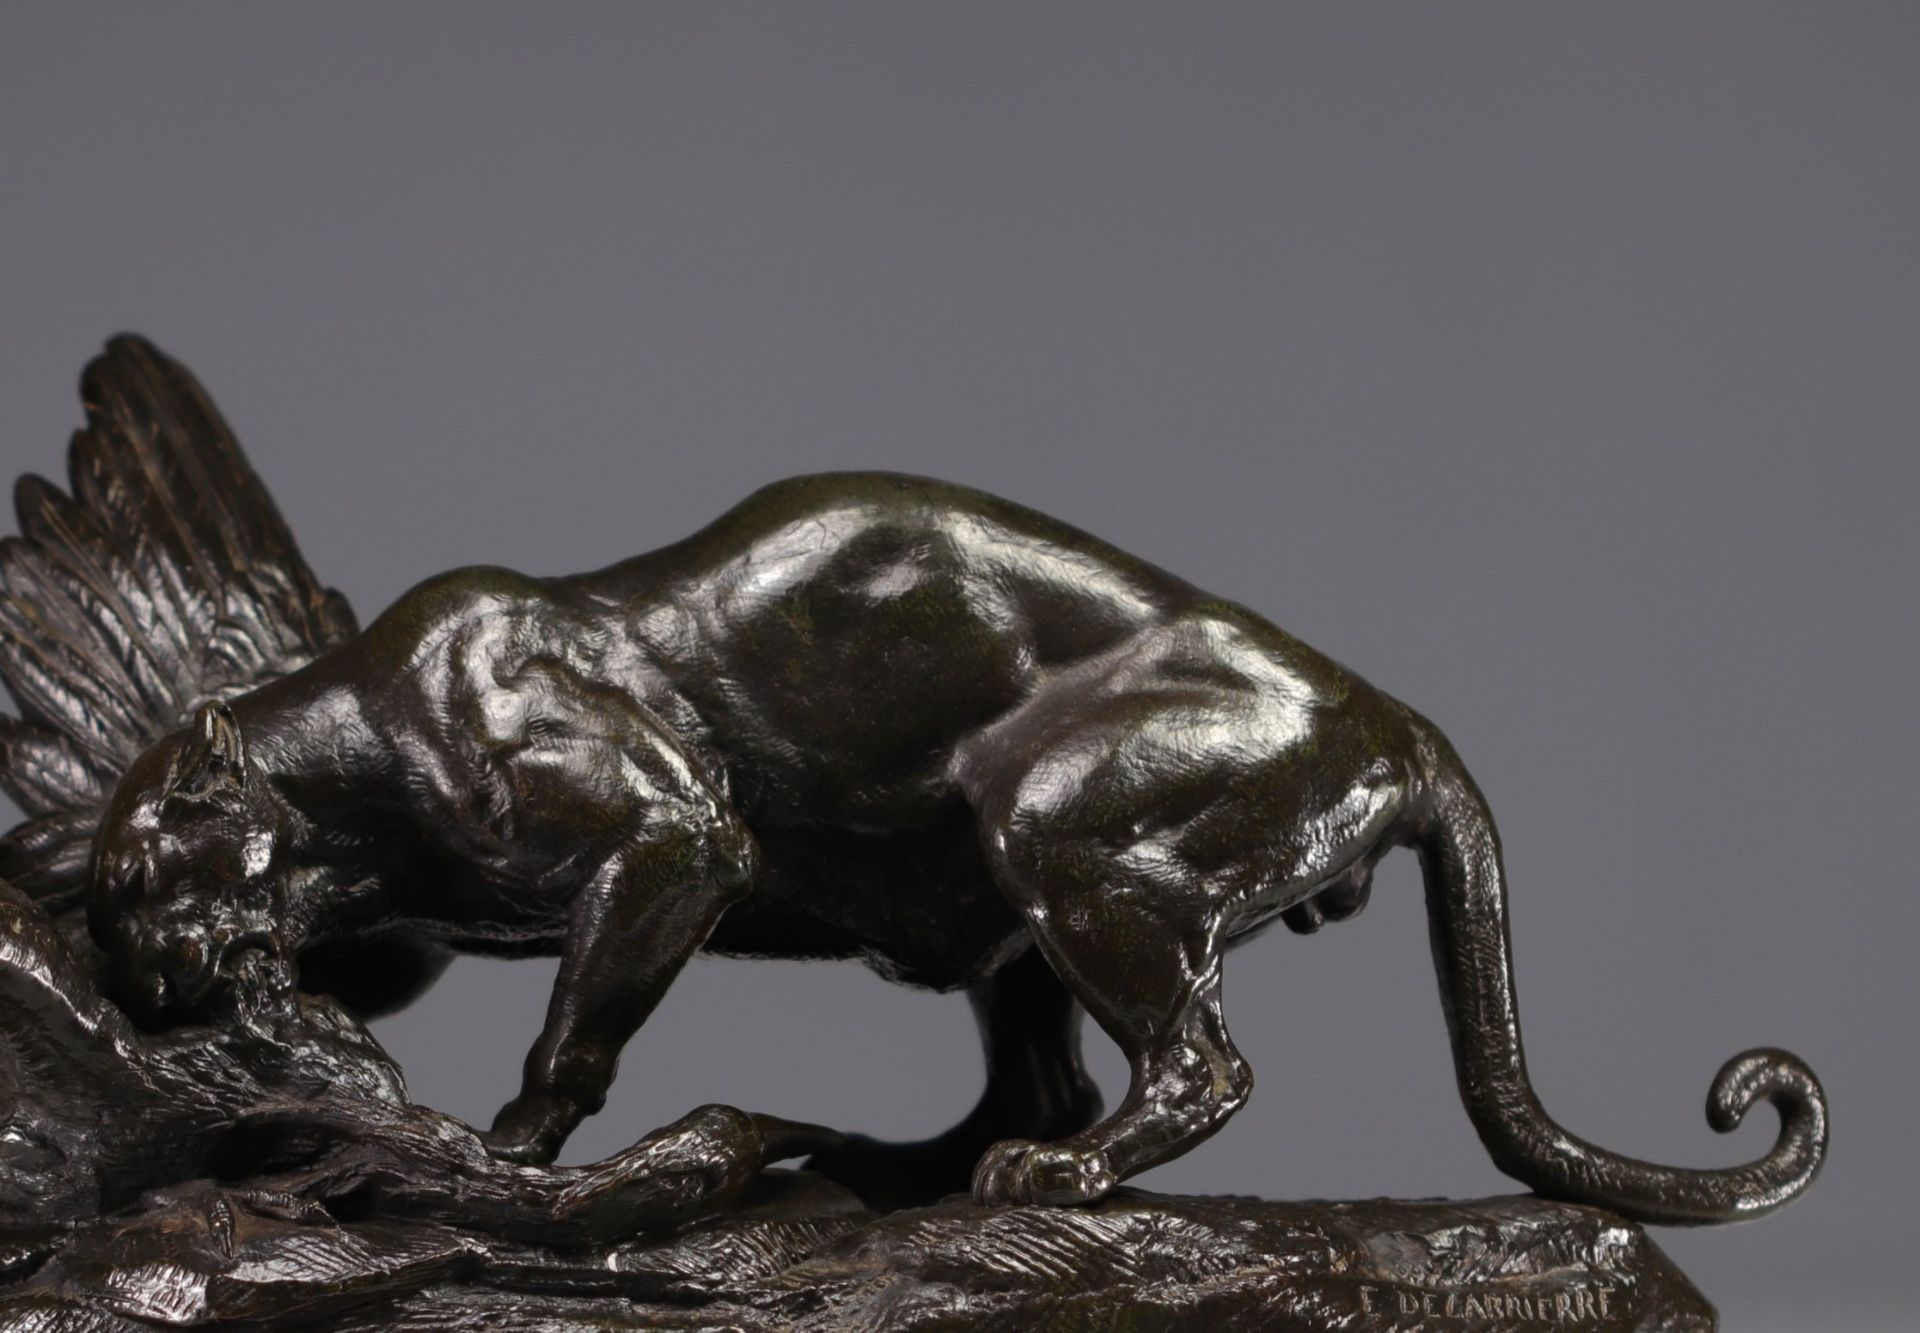 Paul Edouard DELABRIERRE (1829-1910) "Panther devouring a pelican" Bronze sculpture. - Image 3 of 4